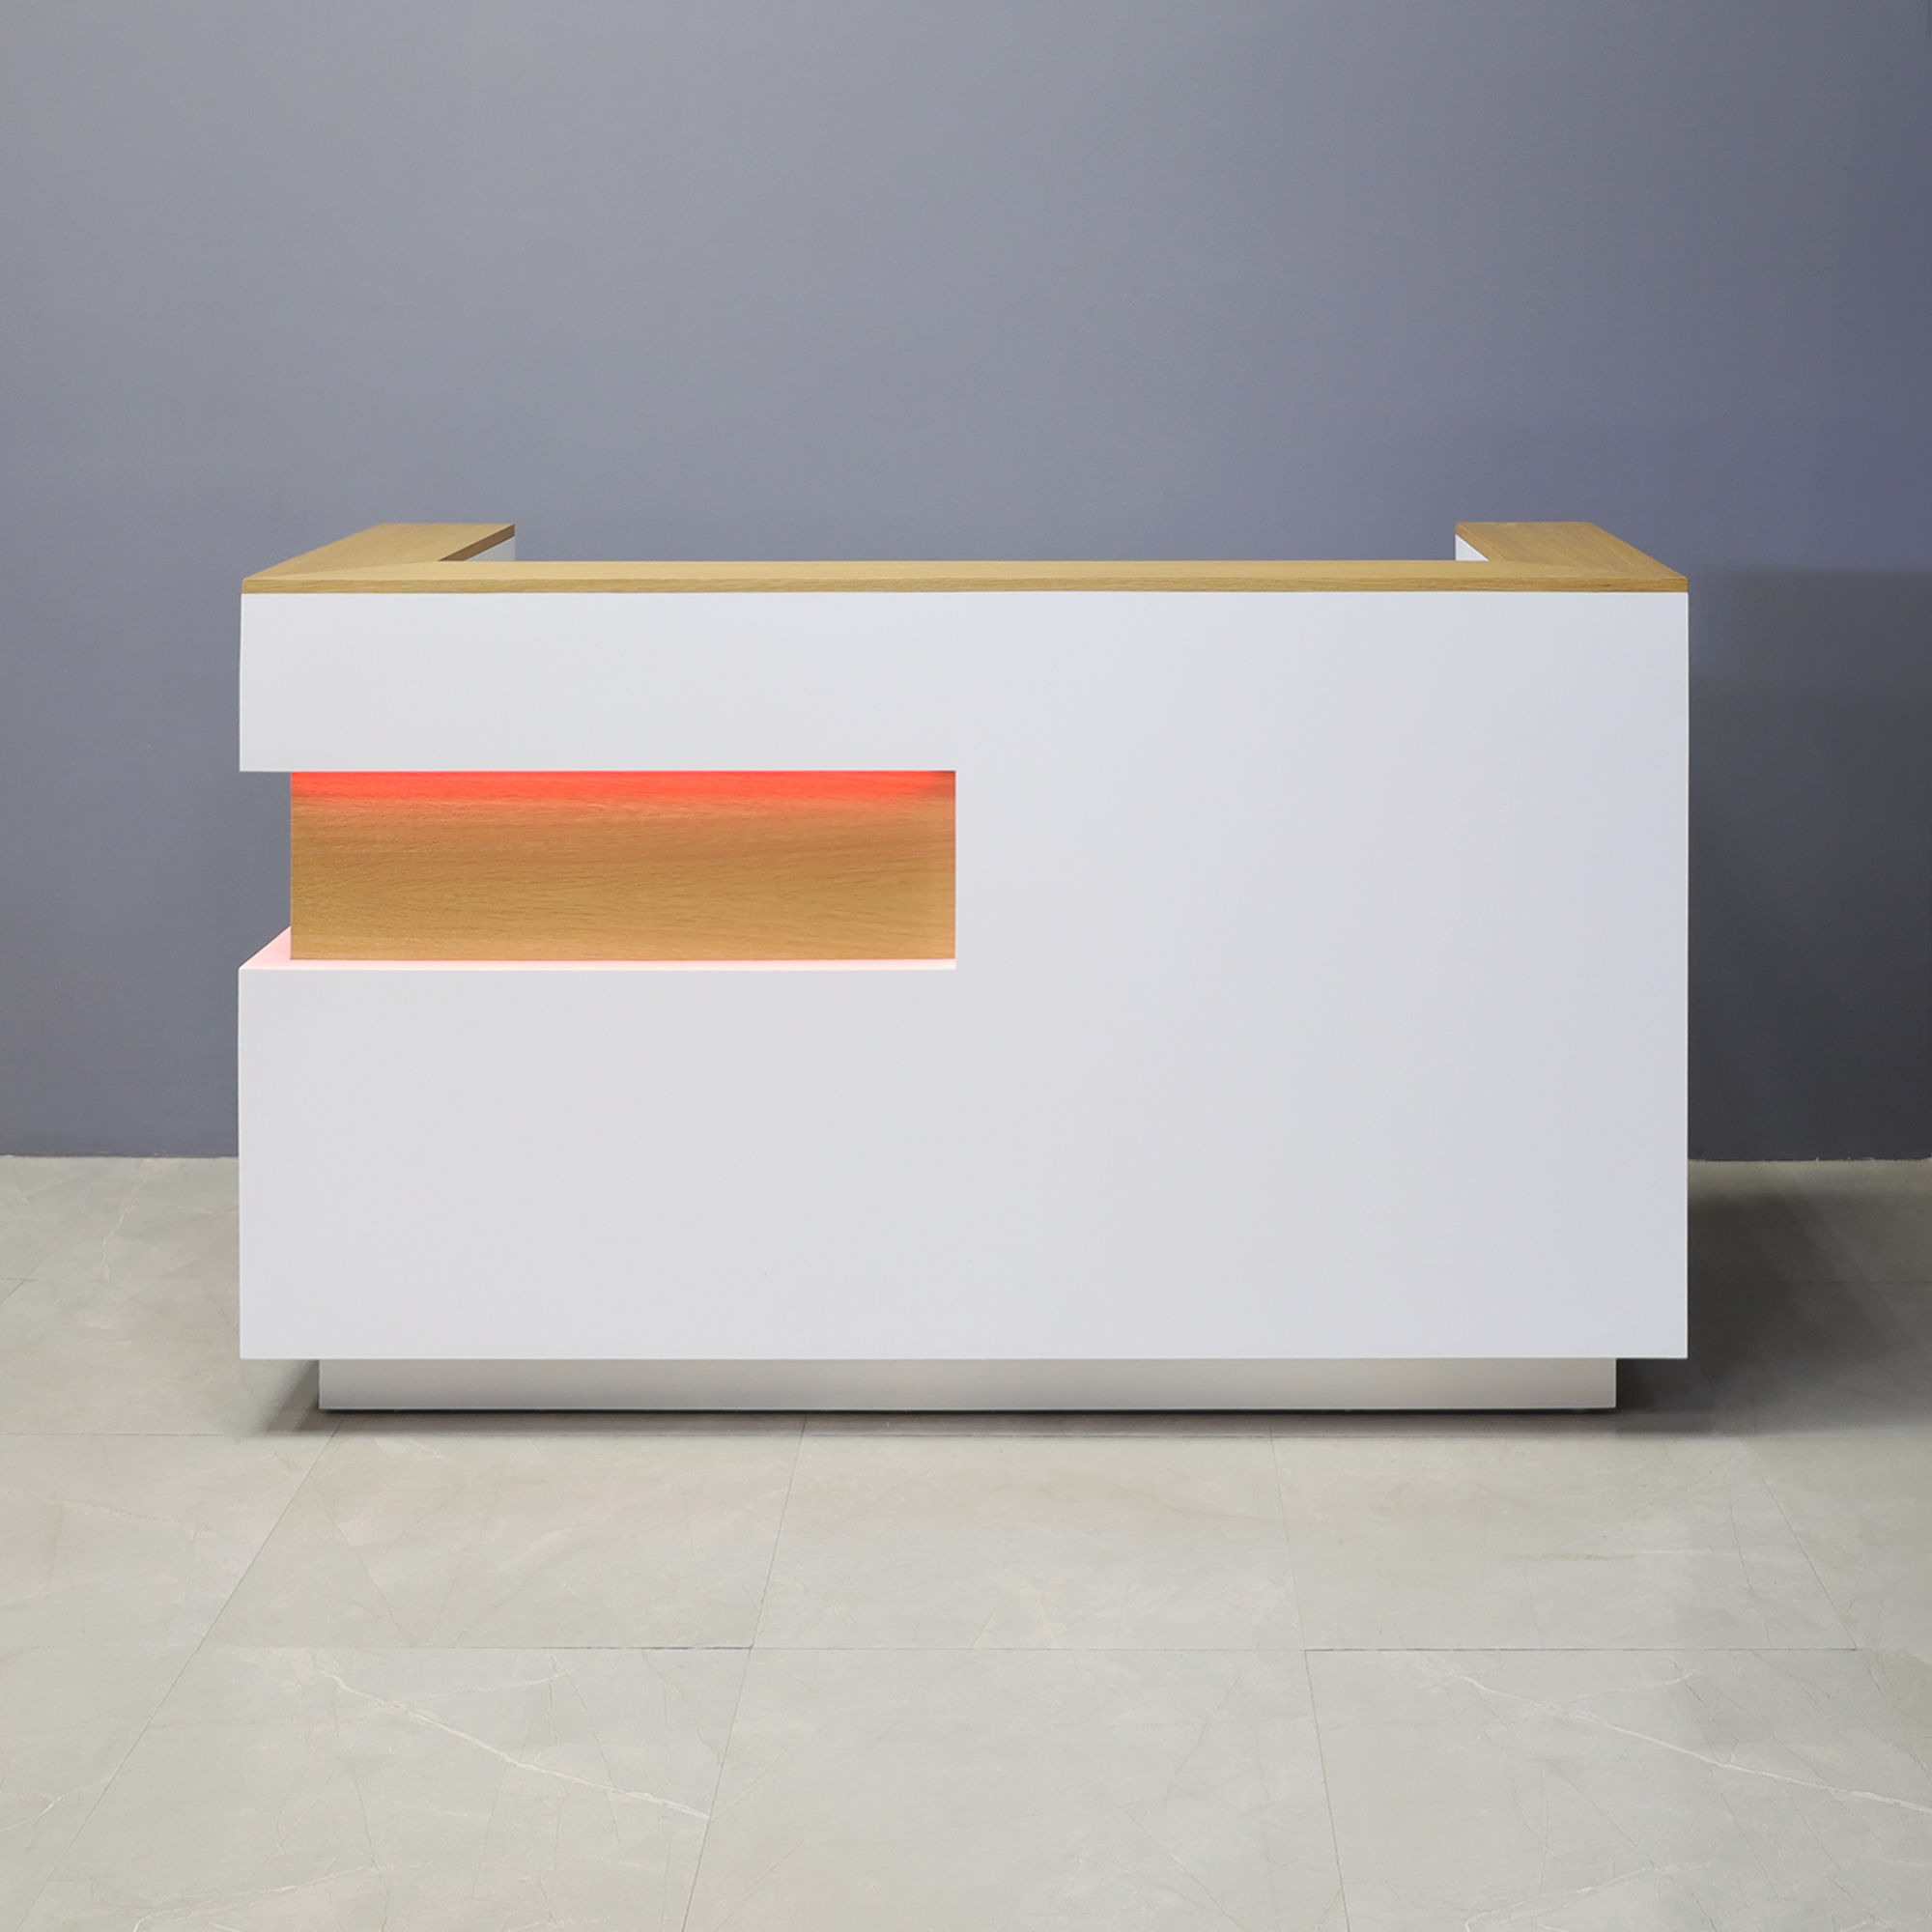 72-inch Manhattan U-Shape Custom Reception Desk in white oak veneer accent panel and top counter, and white matte laminate main desk, with color LED, shown here.